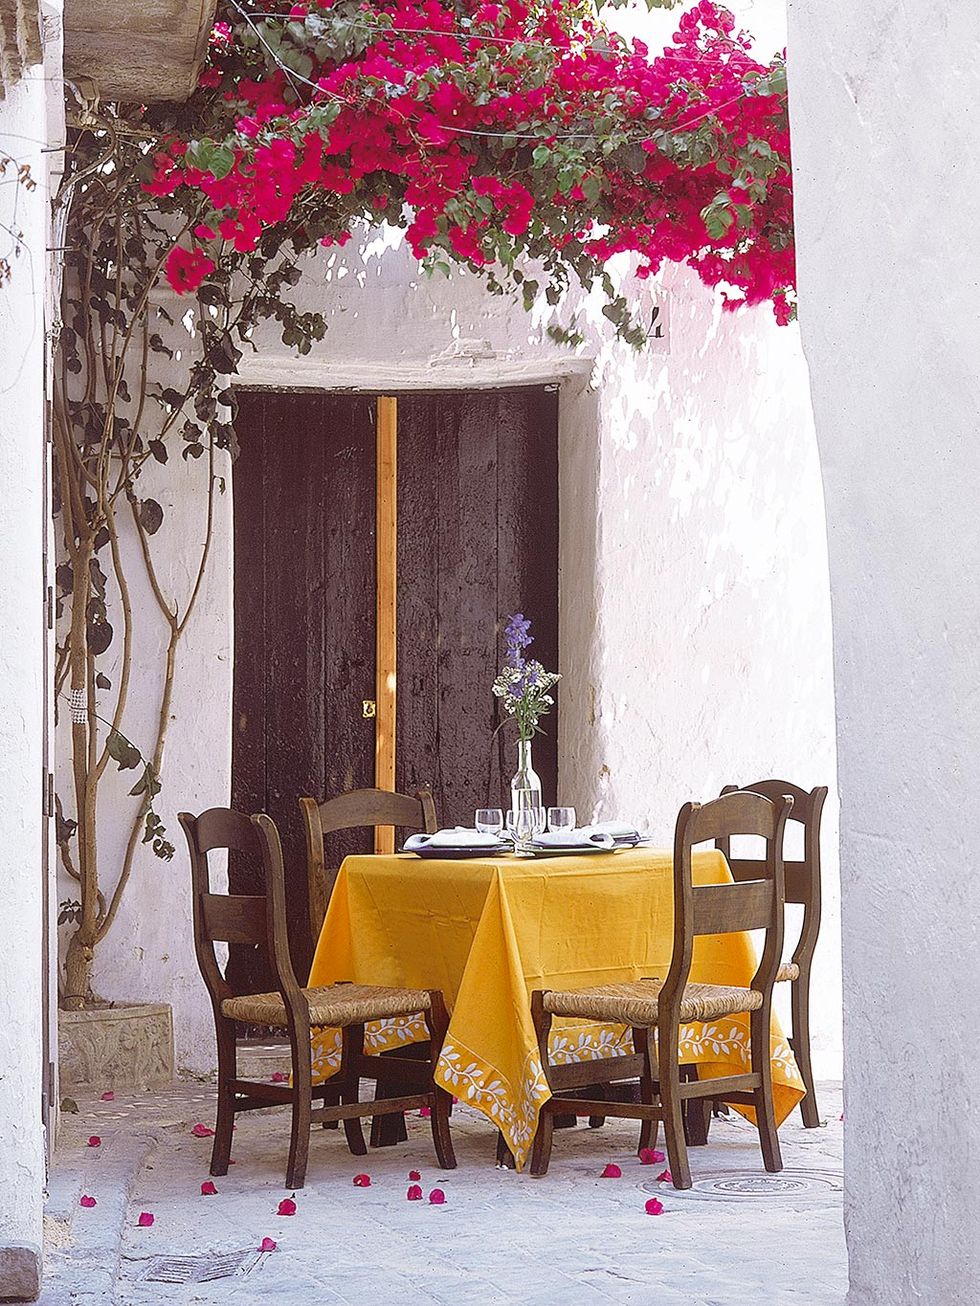 1. Andalusian Charm